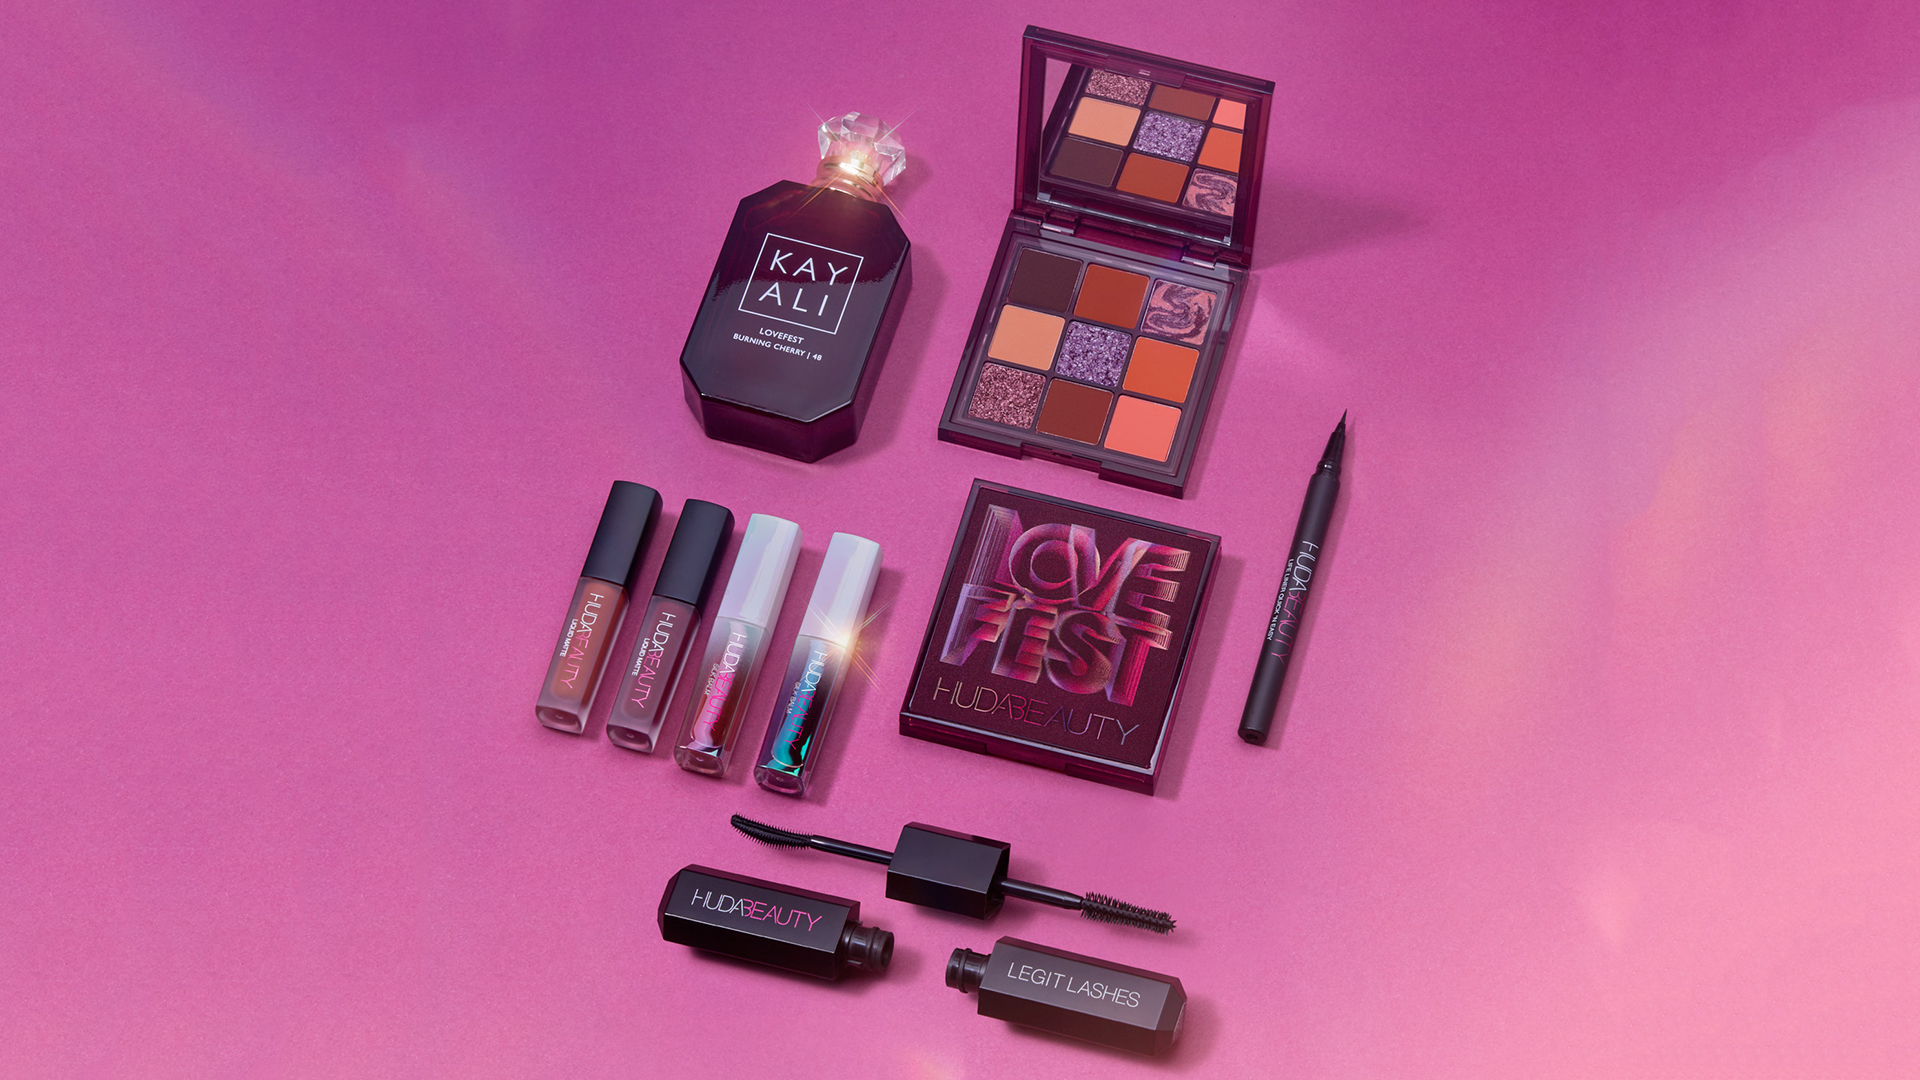 Huda Beauty And Kayali Launch First Joint Collection Theindustrybeauty